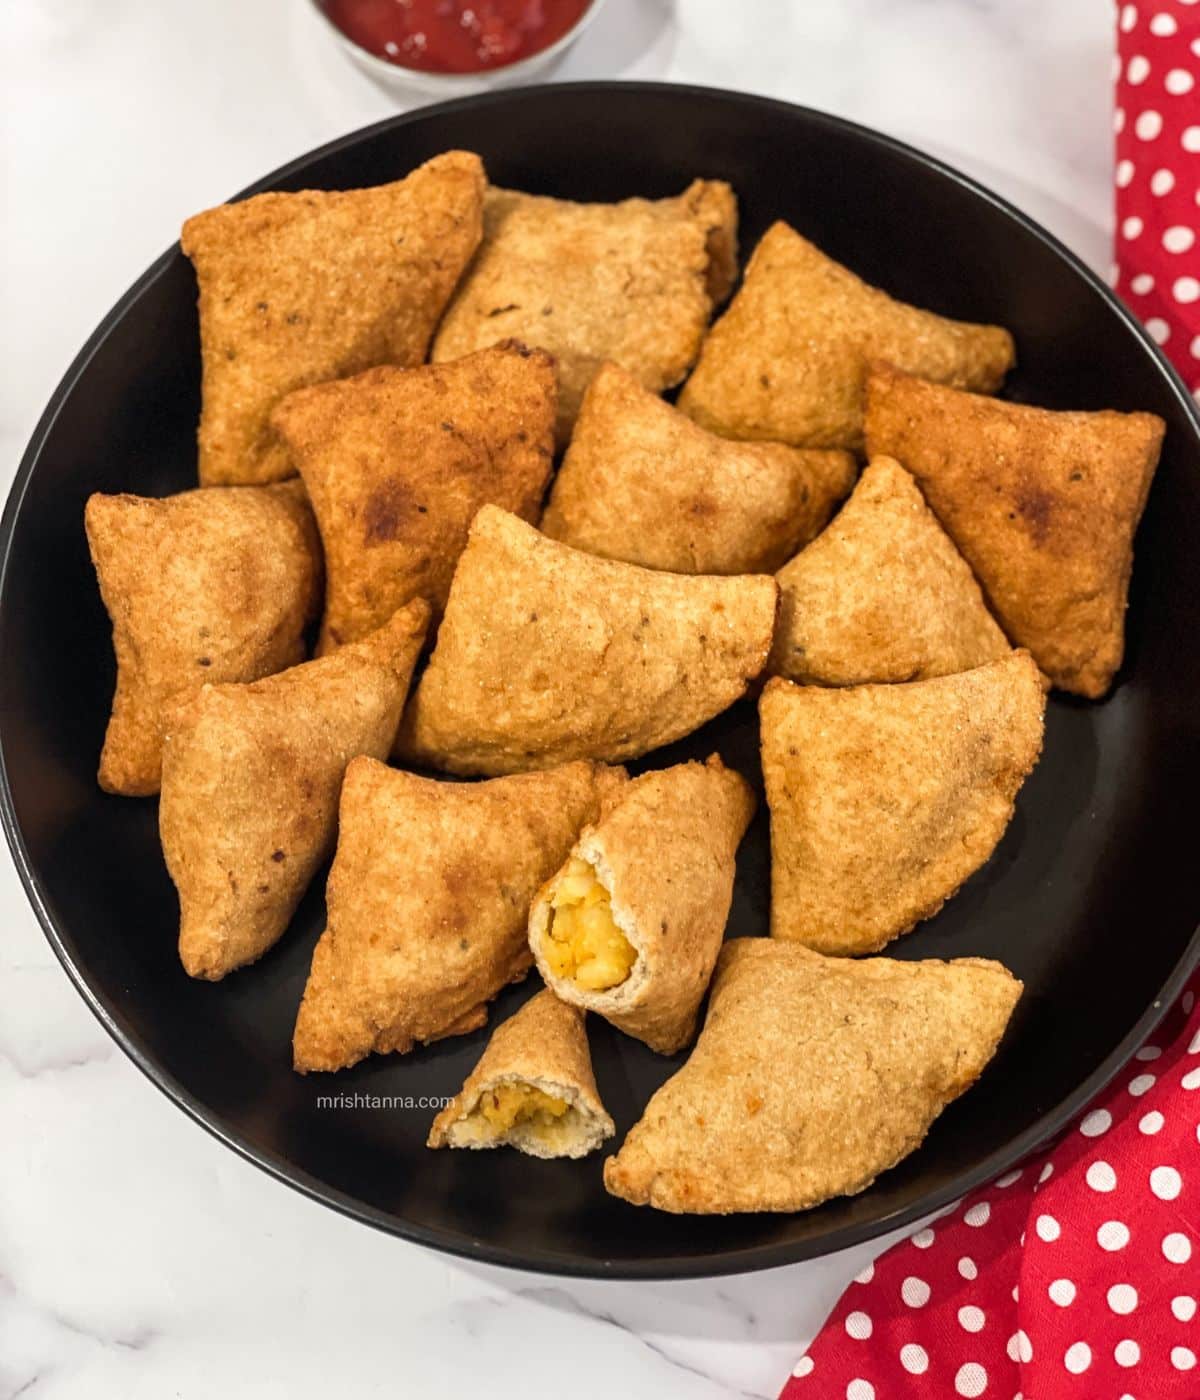 Gluten free samosas are in the plate.